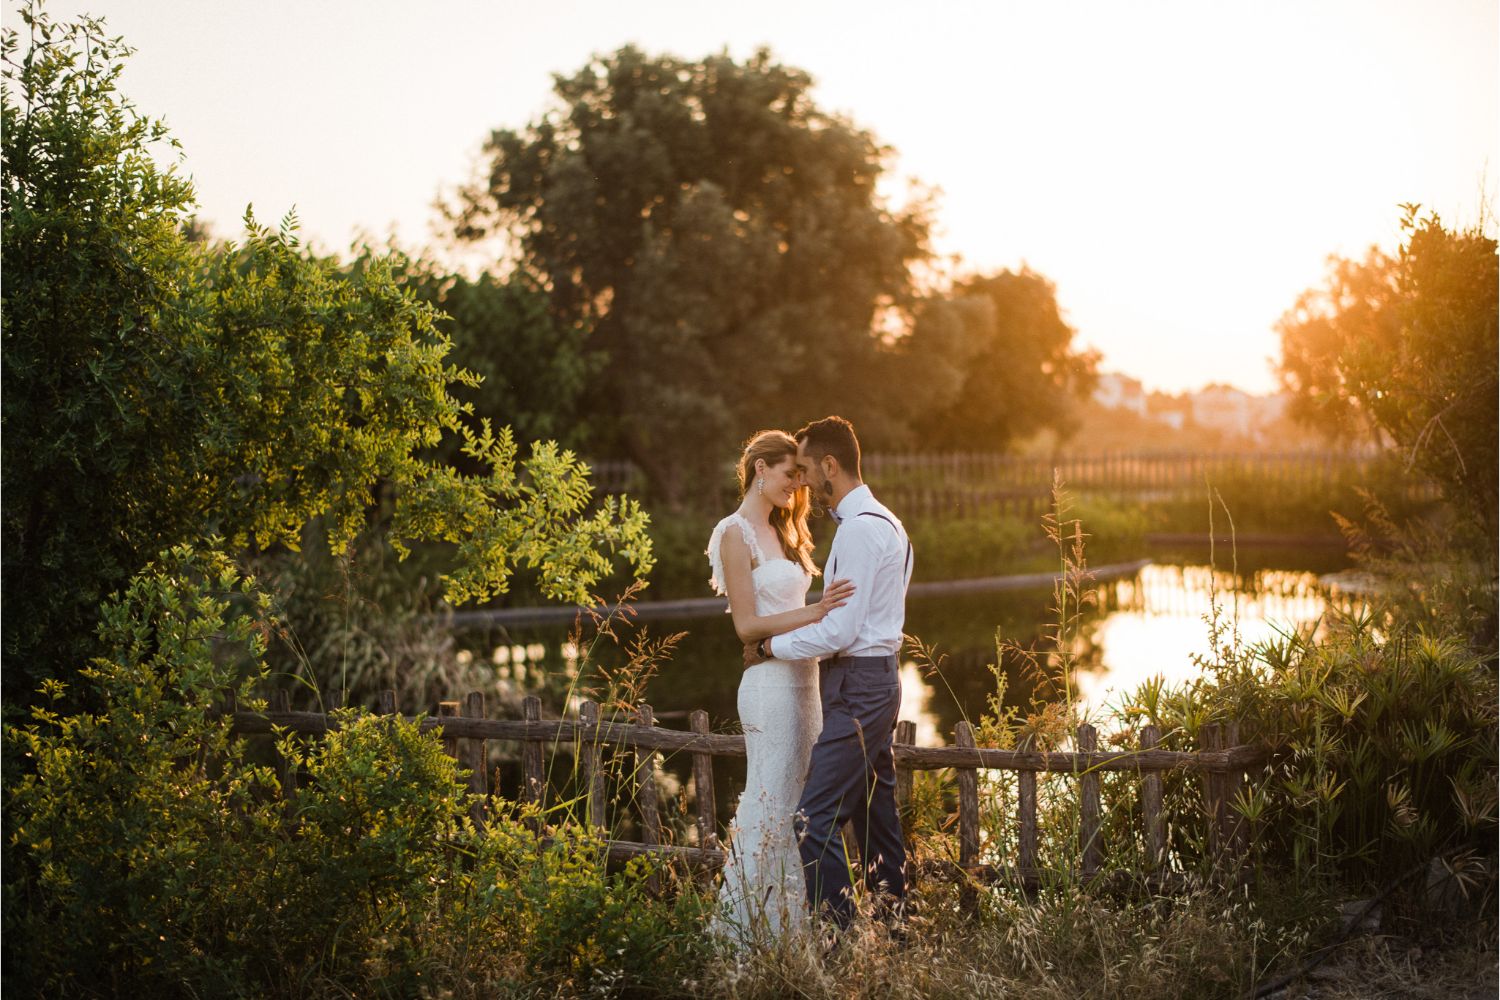 newlyweds' photo session after the ceremony at rustic wedding in Crete